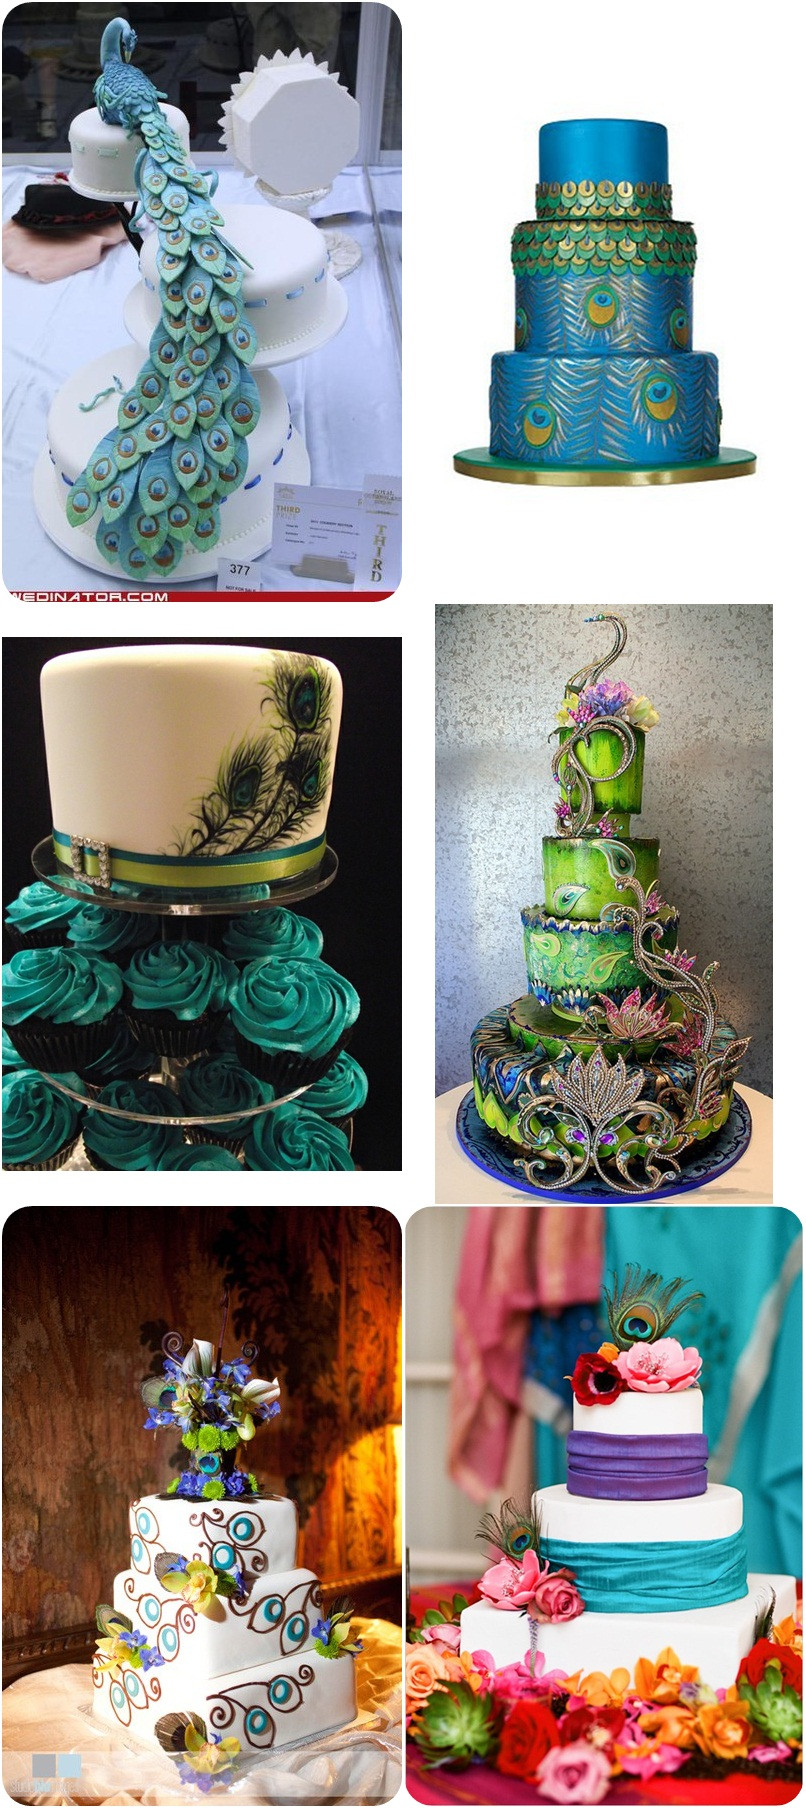 Wedding Cakes Centerpieces
 Peacock Wedding Ideas and Inspirations